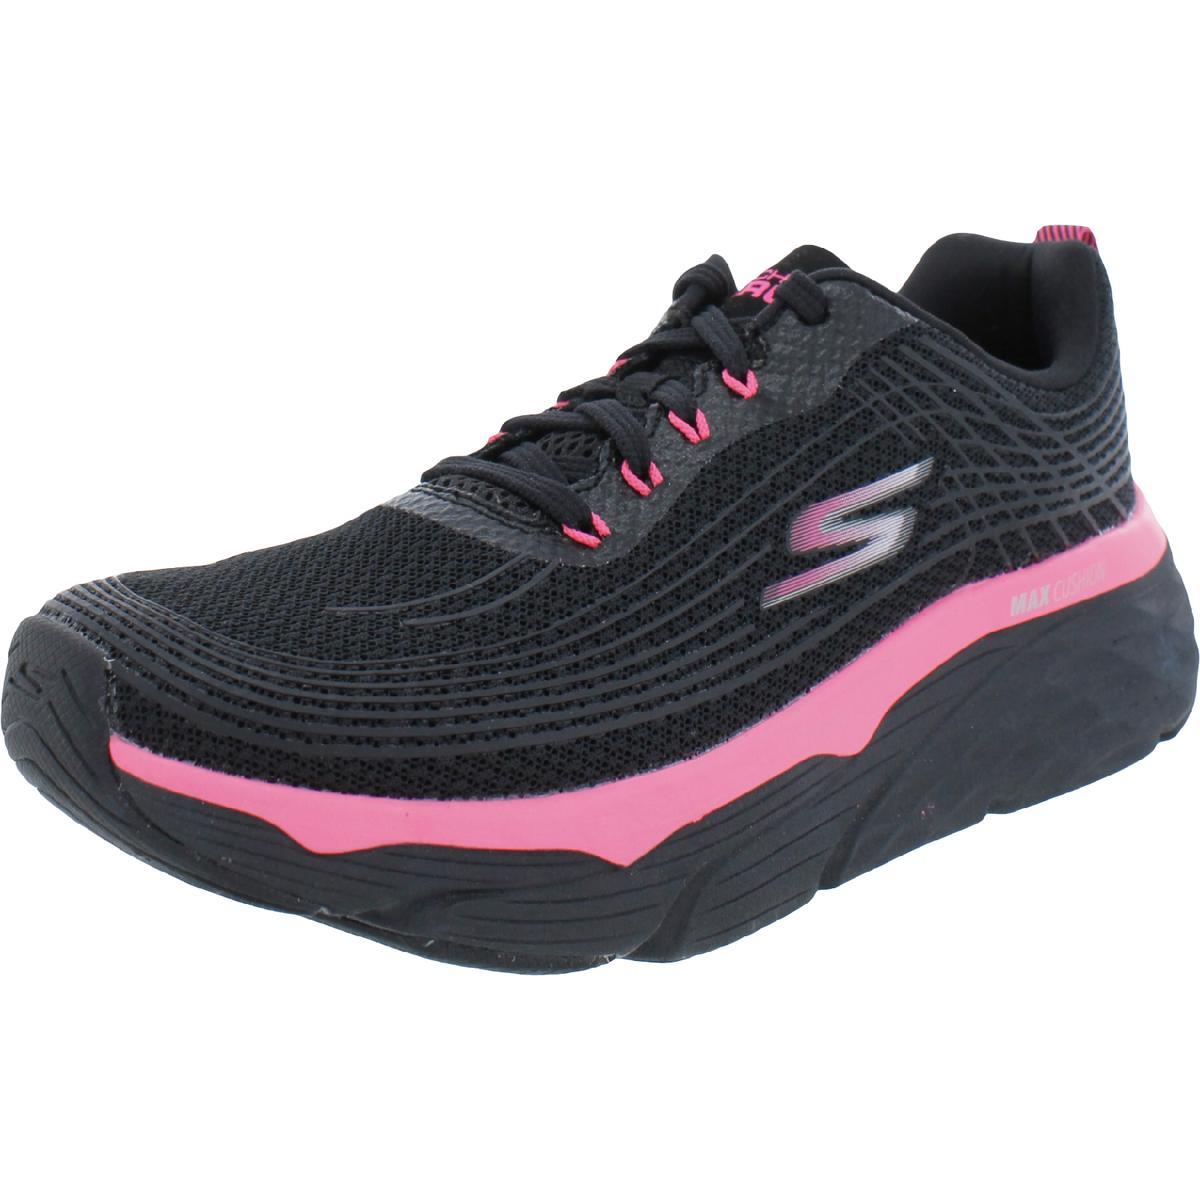 Skechers Womens Max Cushioning Elite Workout Running Shoes Sneakers Bhfo 6016 Black/Hot Pink